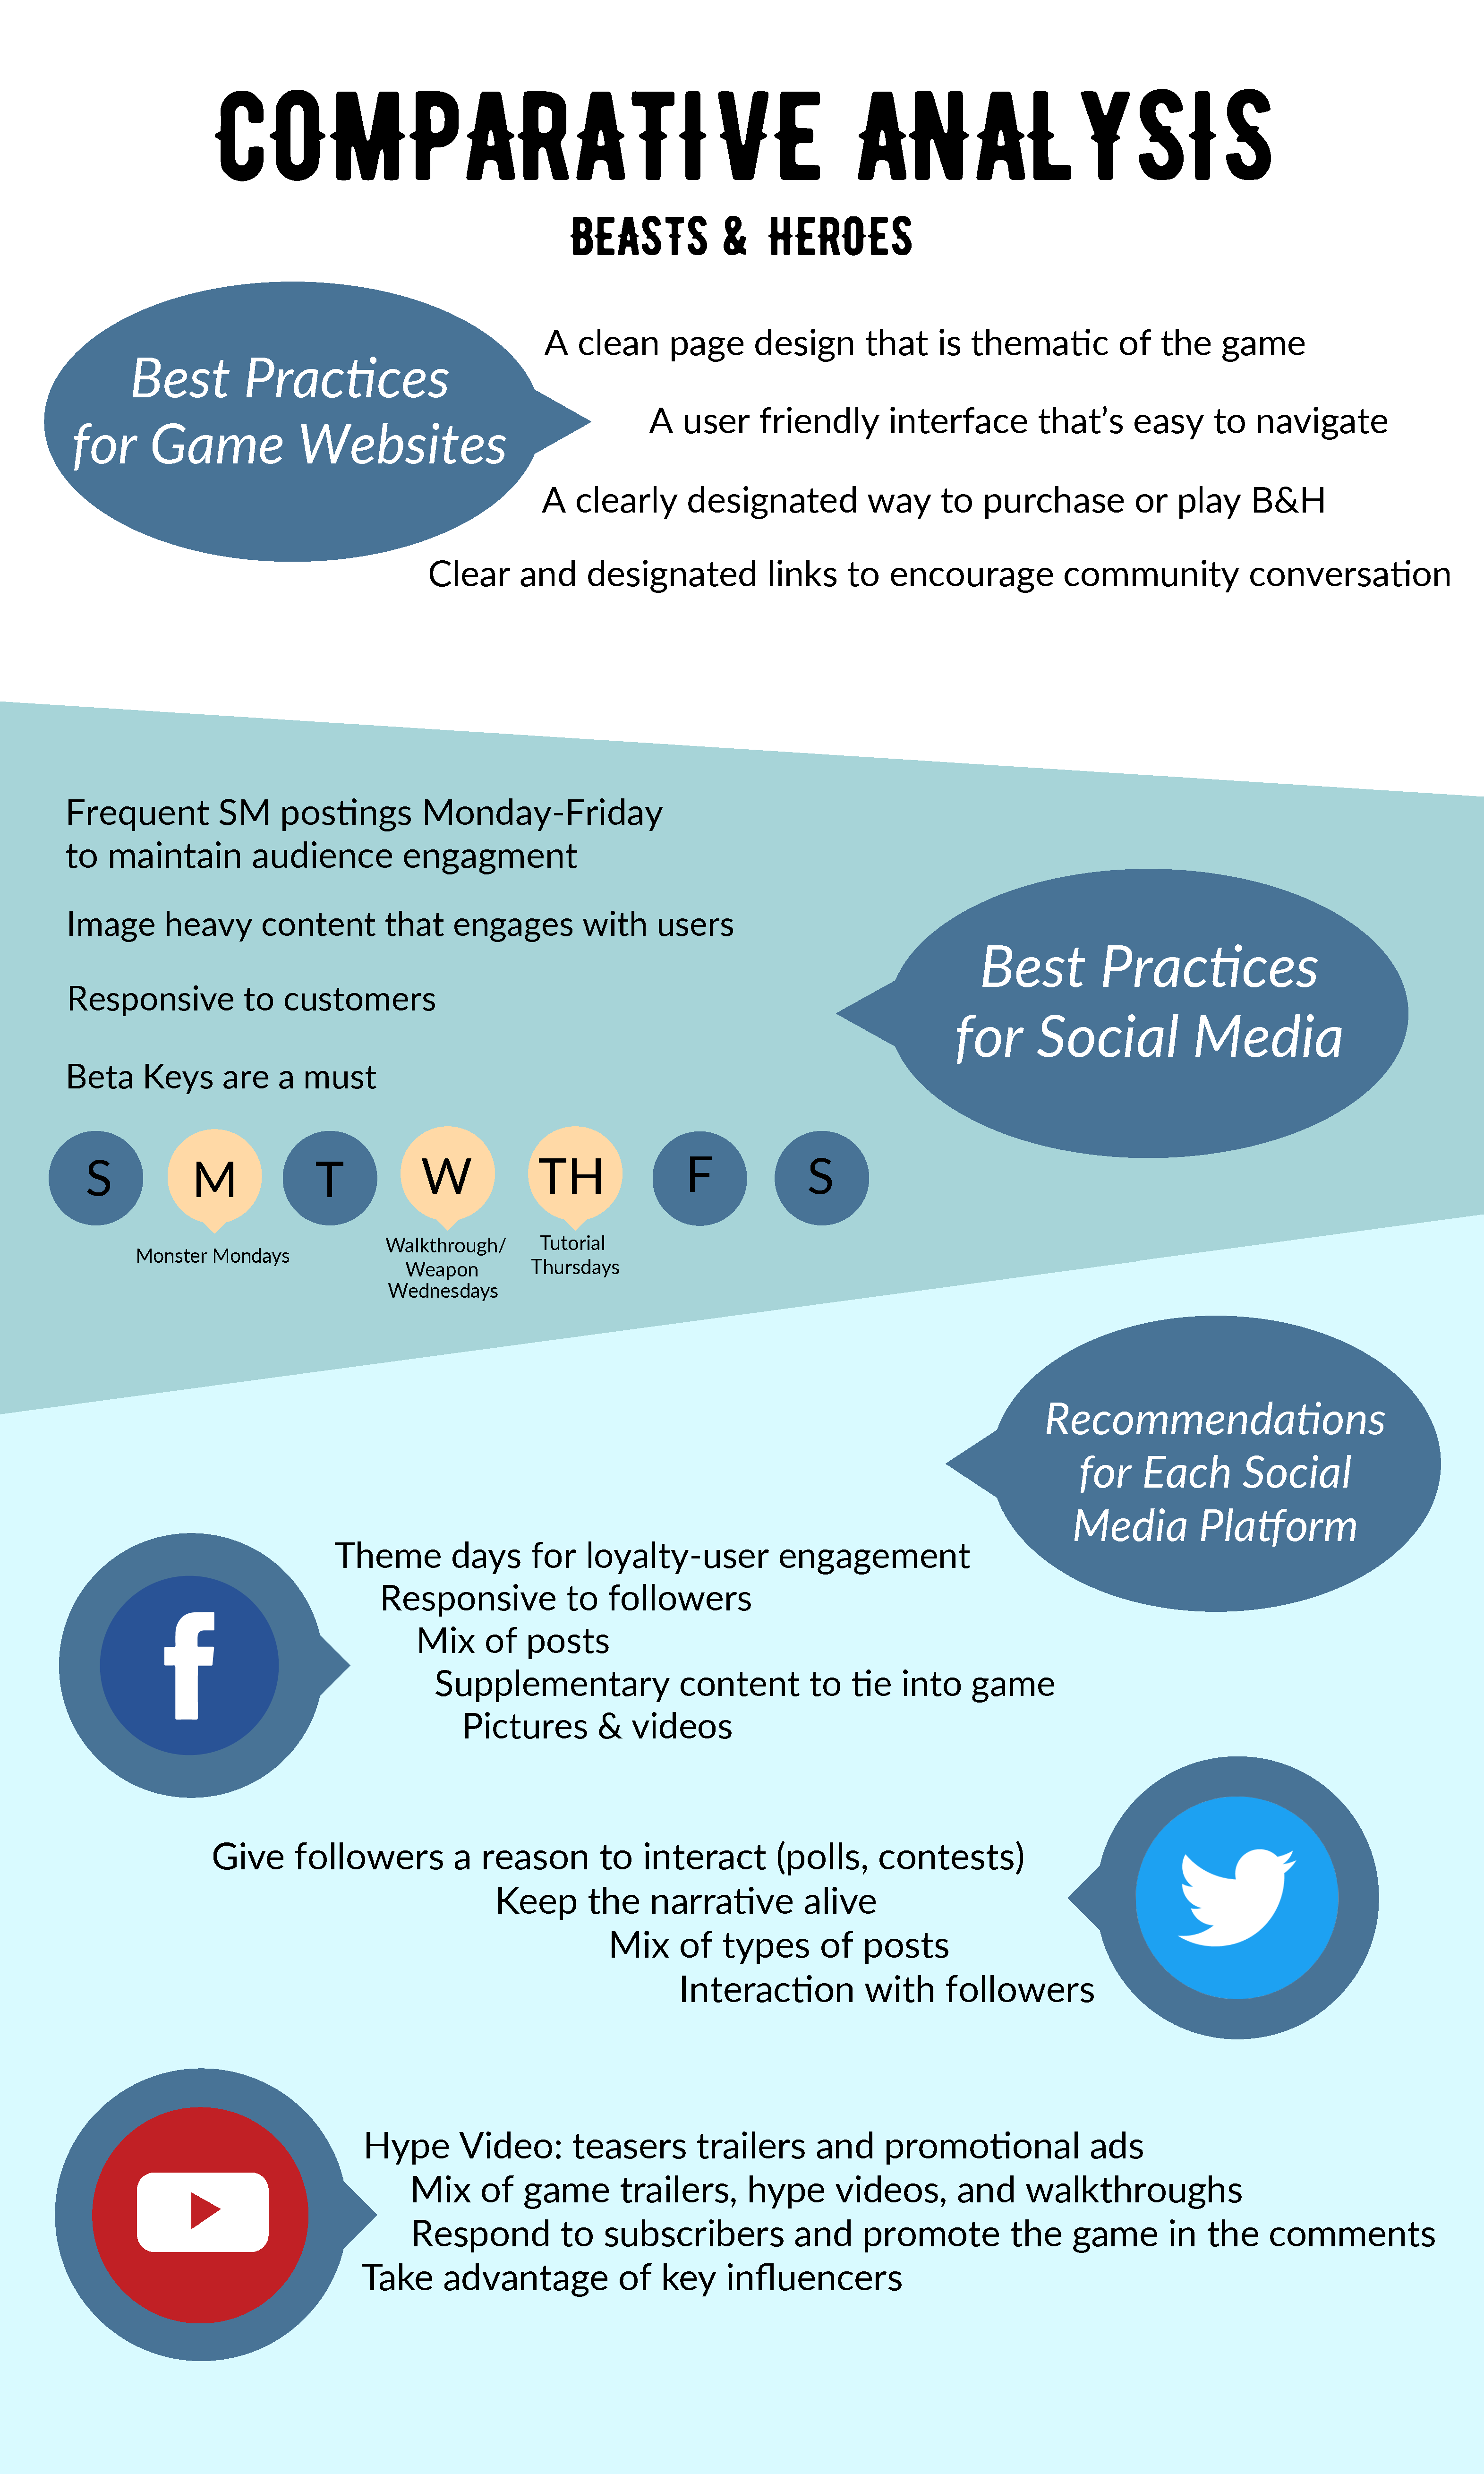 Infographic explaining best practices to market Beasts and Heroes on social media platforms